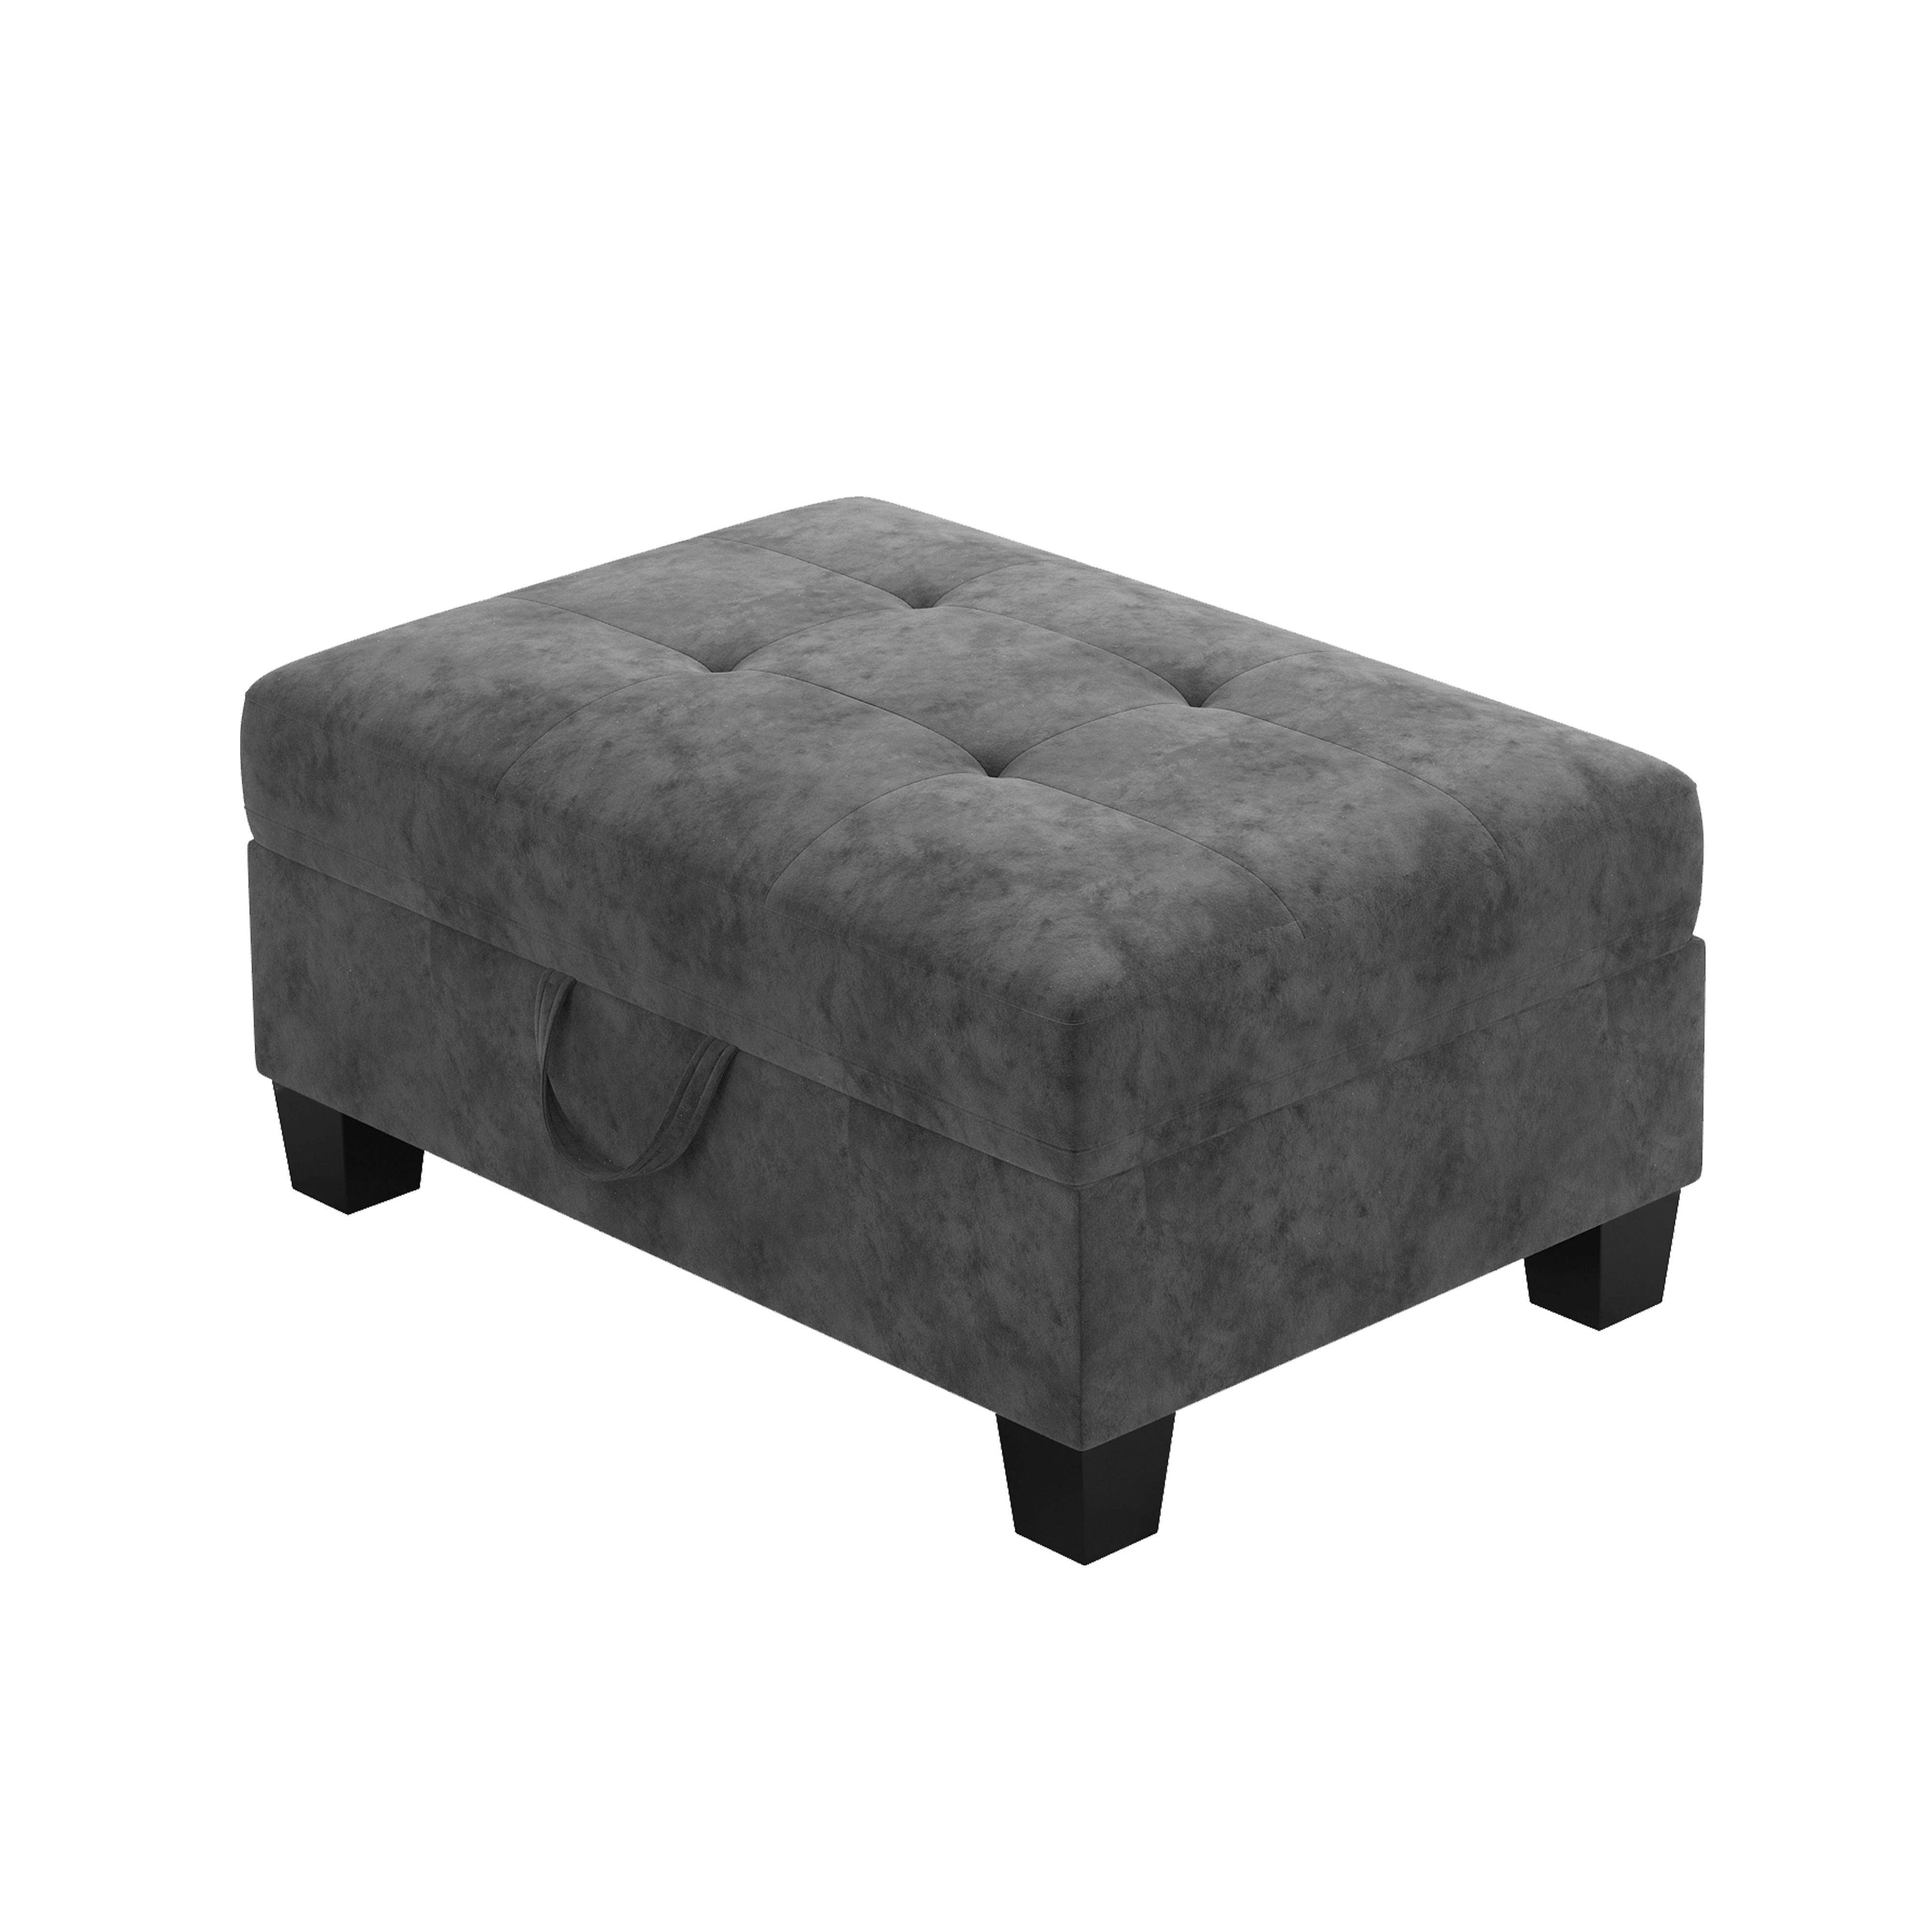 Remi - Velvet Reversible Sectional Sofa With Dropdown Table, Charging Ports, Cupholders, Storage Ottoman, And Pillows